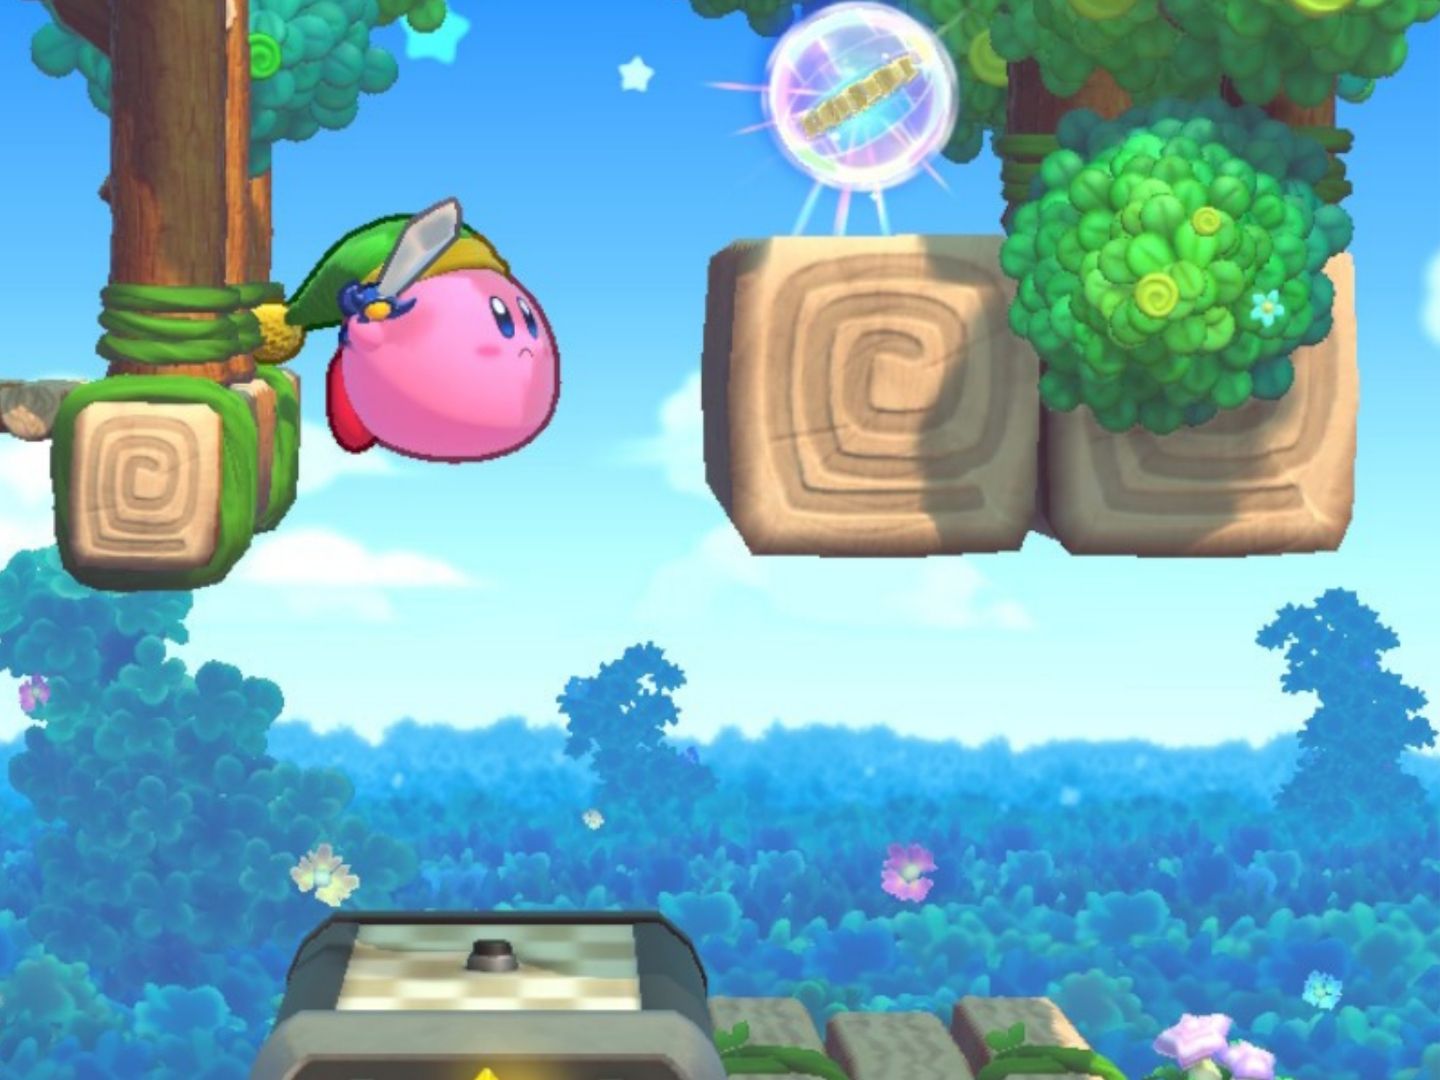 Kirby floats up to an Energy Sphere on the right.